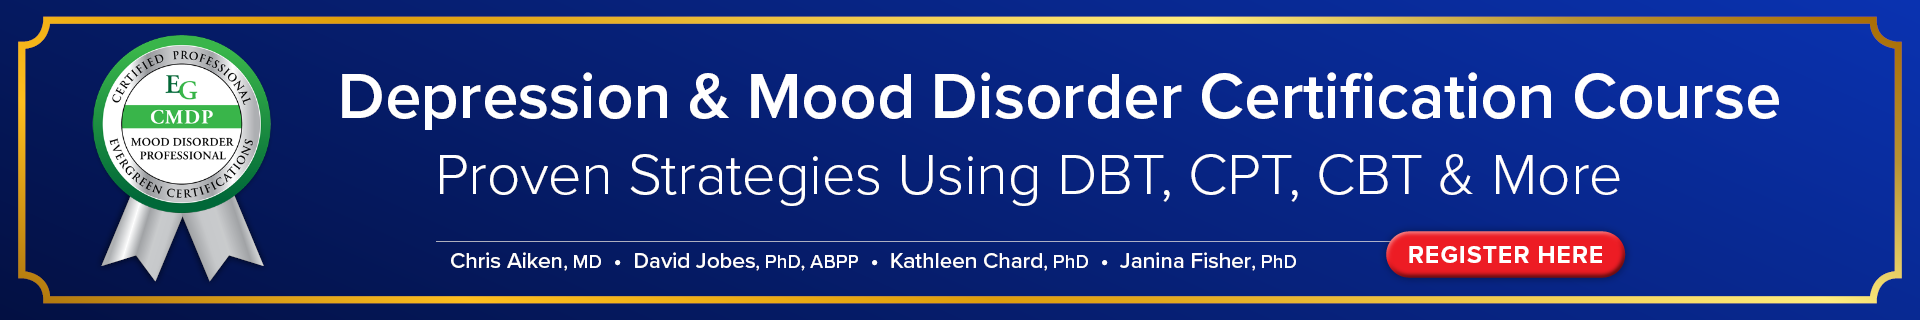 Depression and Mood Disorder Certification Course: Proven Strategies Using DBT, CPT, CBT, and More